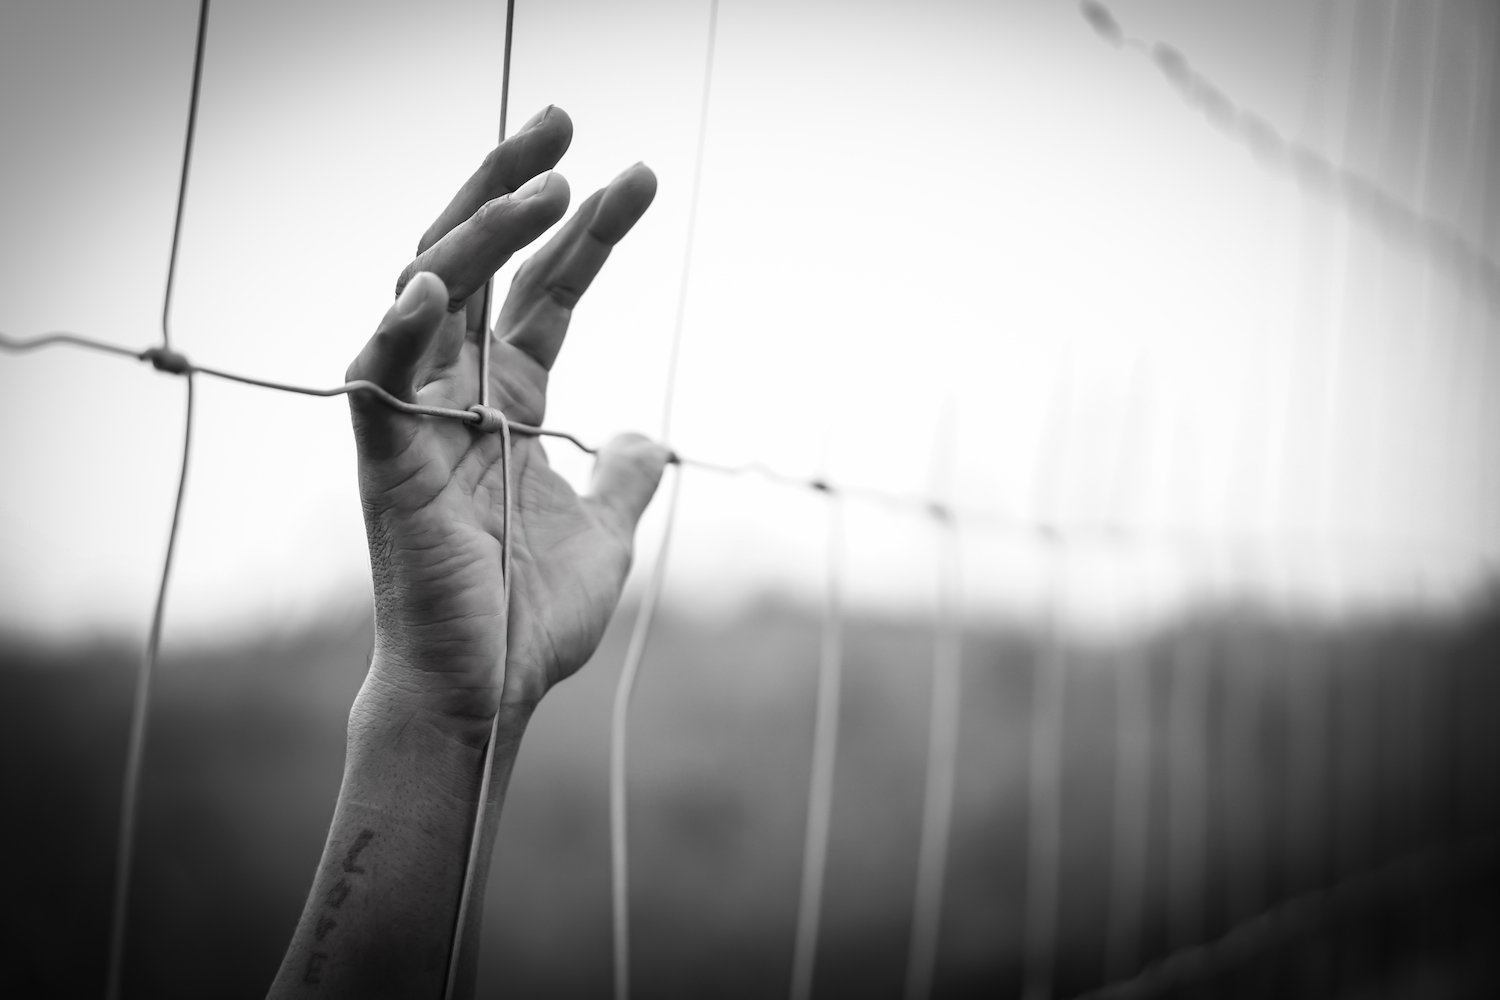 Young hand reaching through barb wire fence